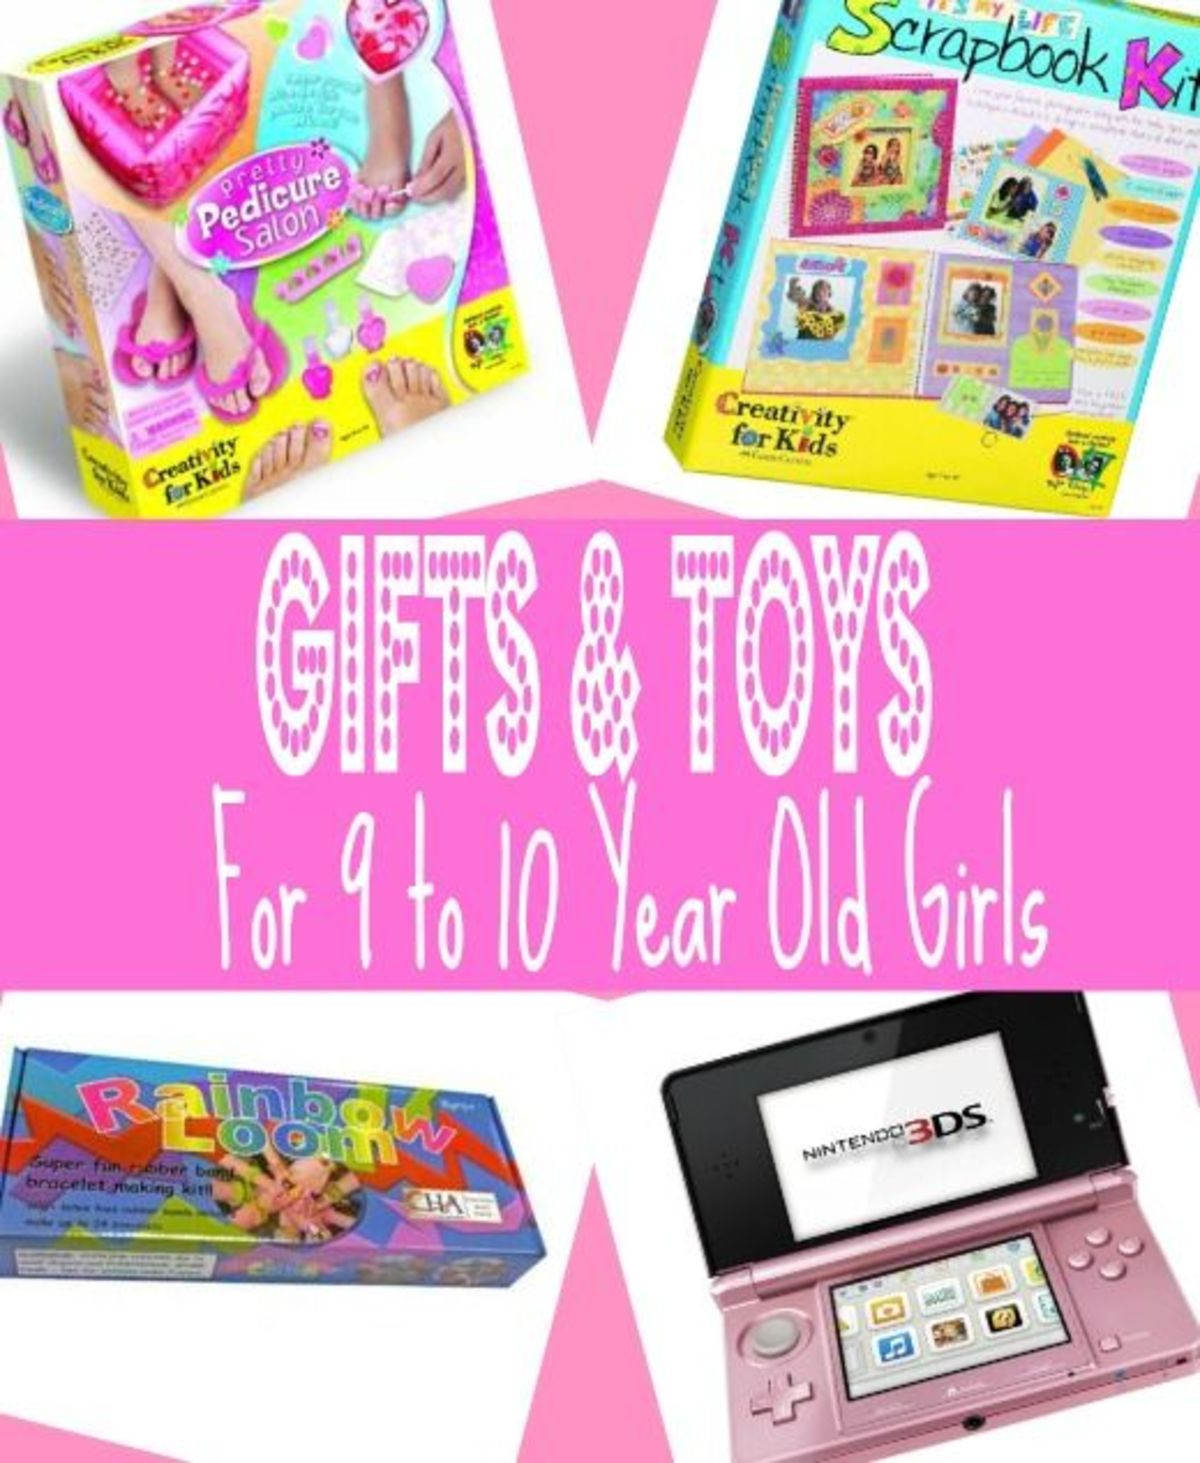 Gift Ideas For 9 Year Old Girls
 Best Unique Gift Ideas For A 9 Year Old Girl Reviews And